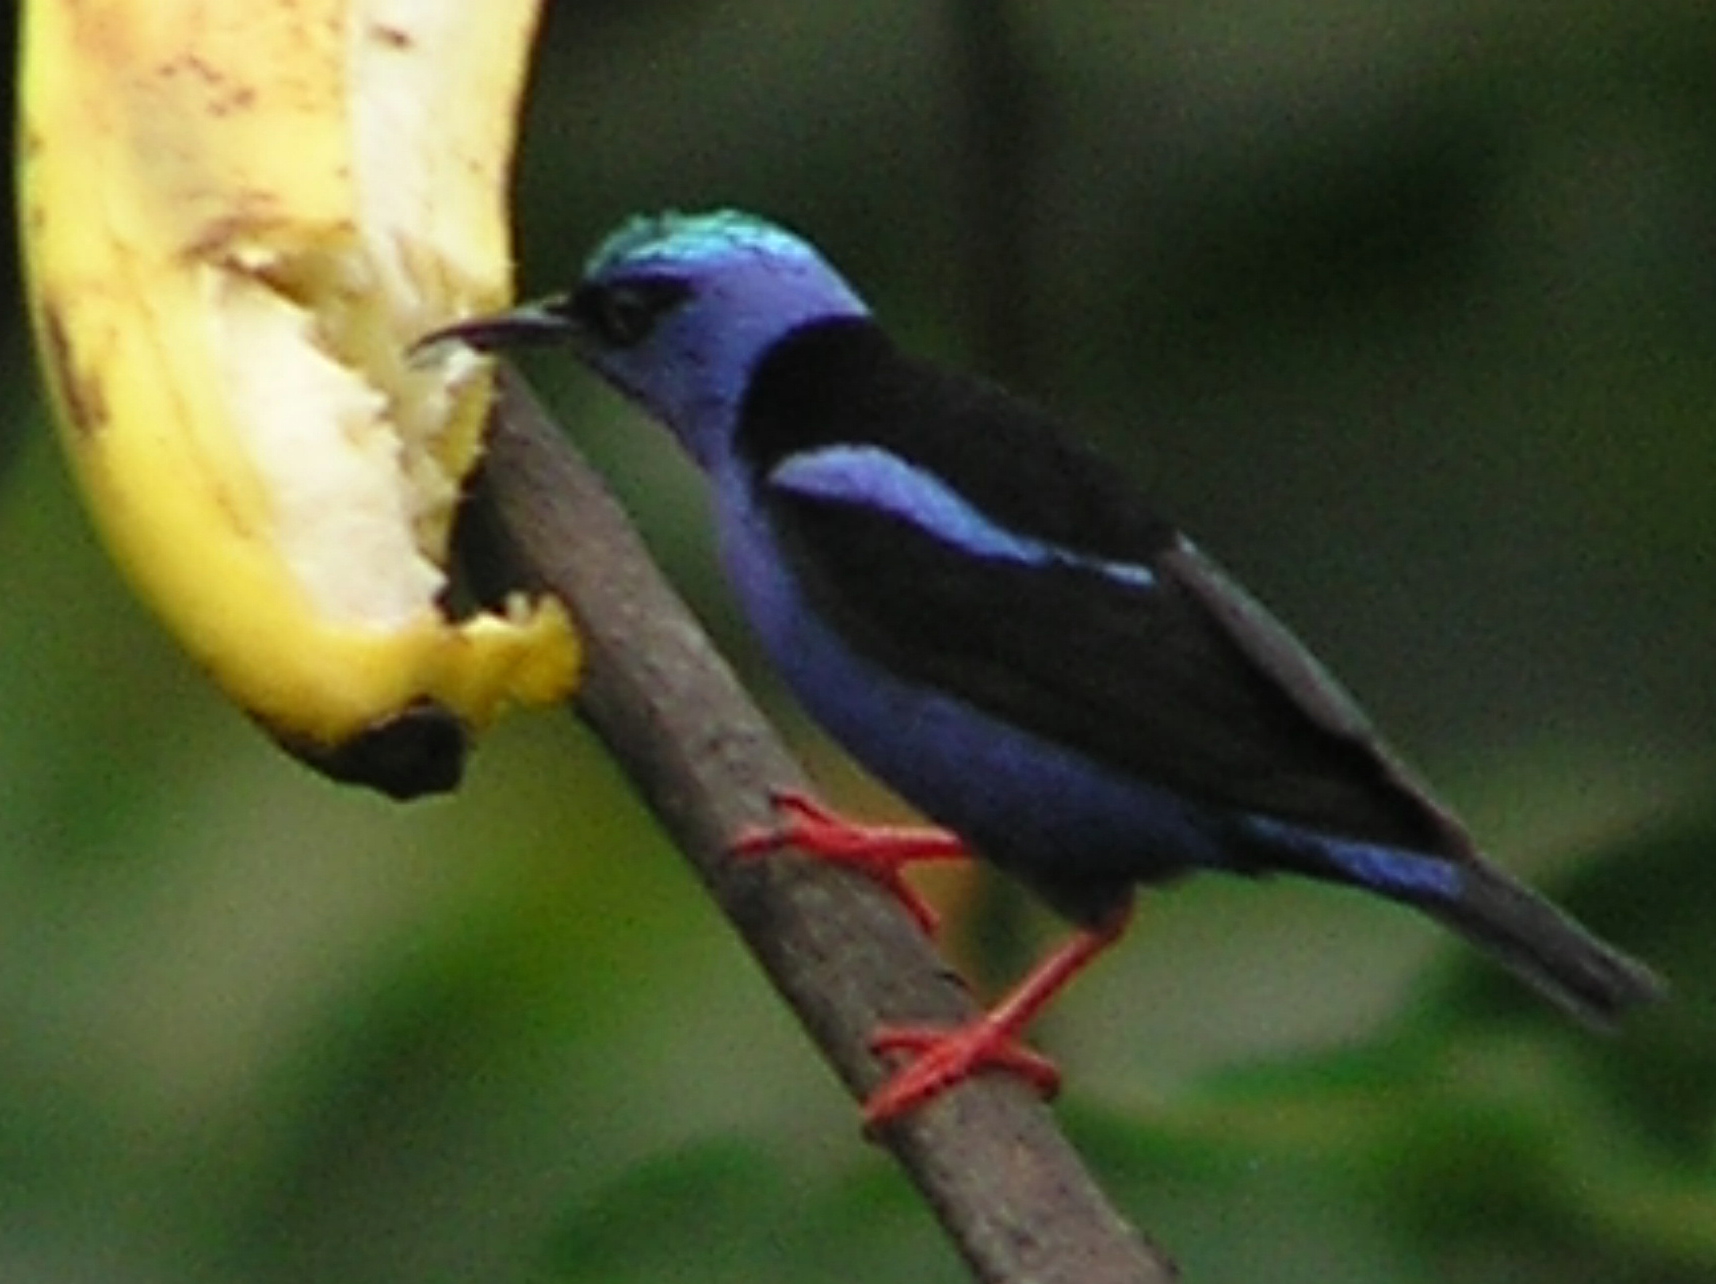 Click picture to see more Red-legged Honeycreeper photos.